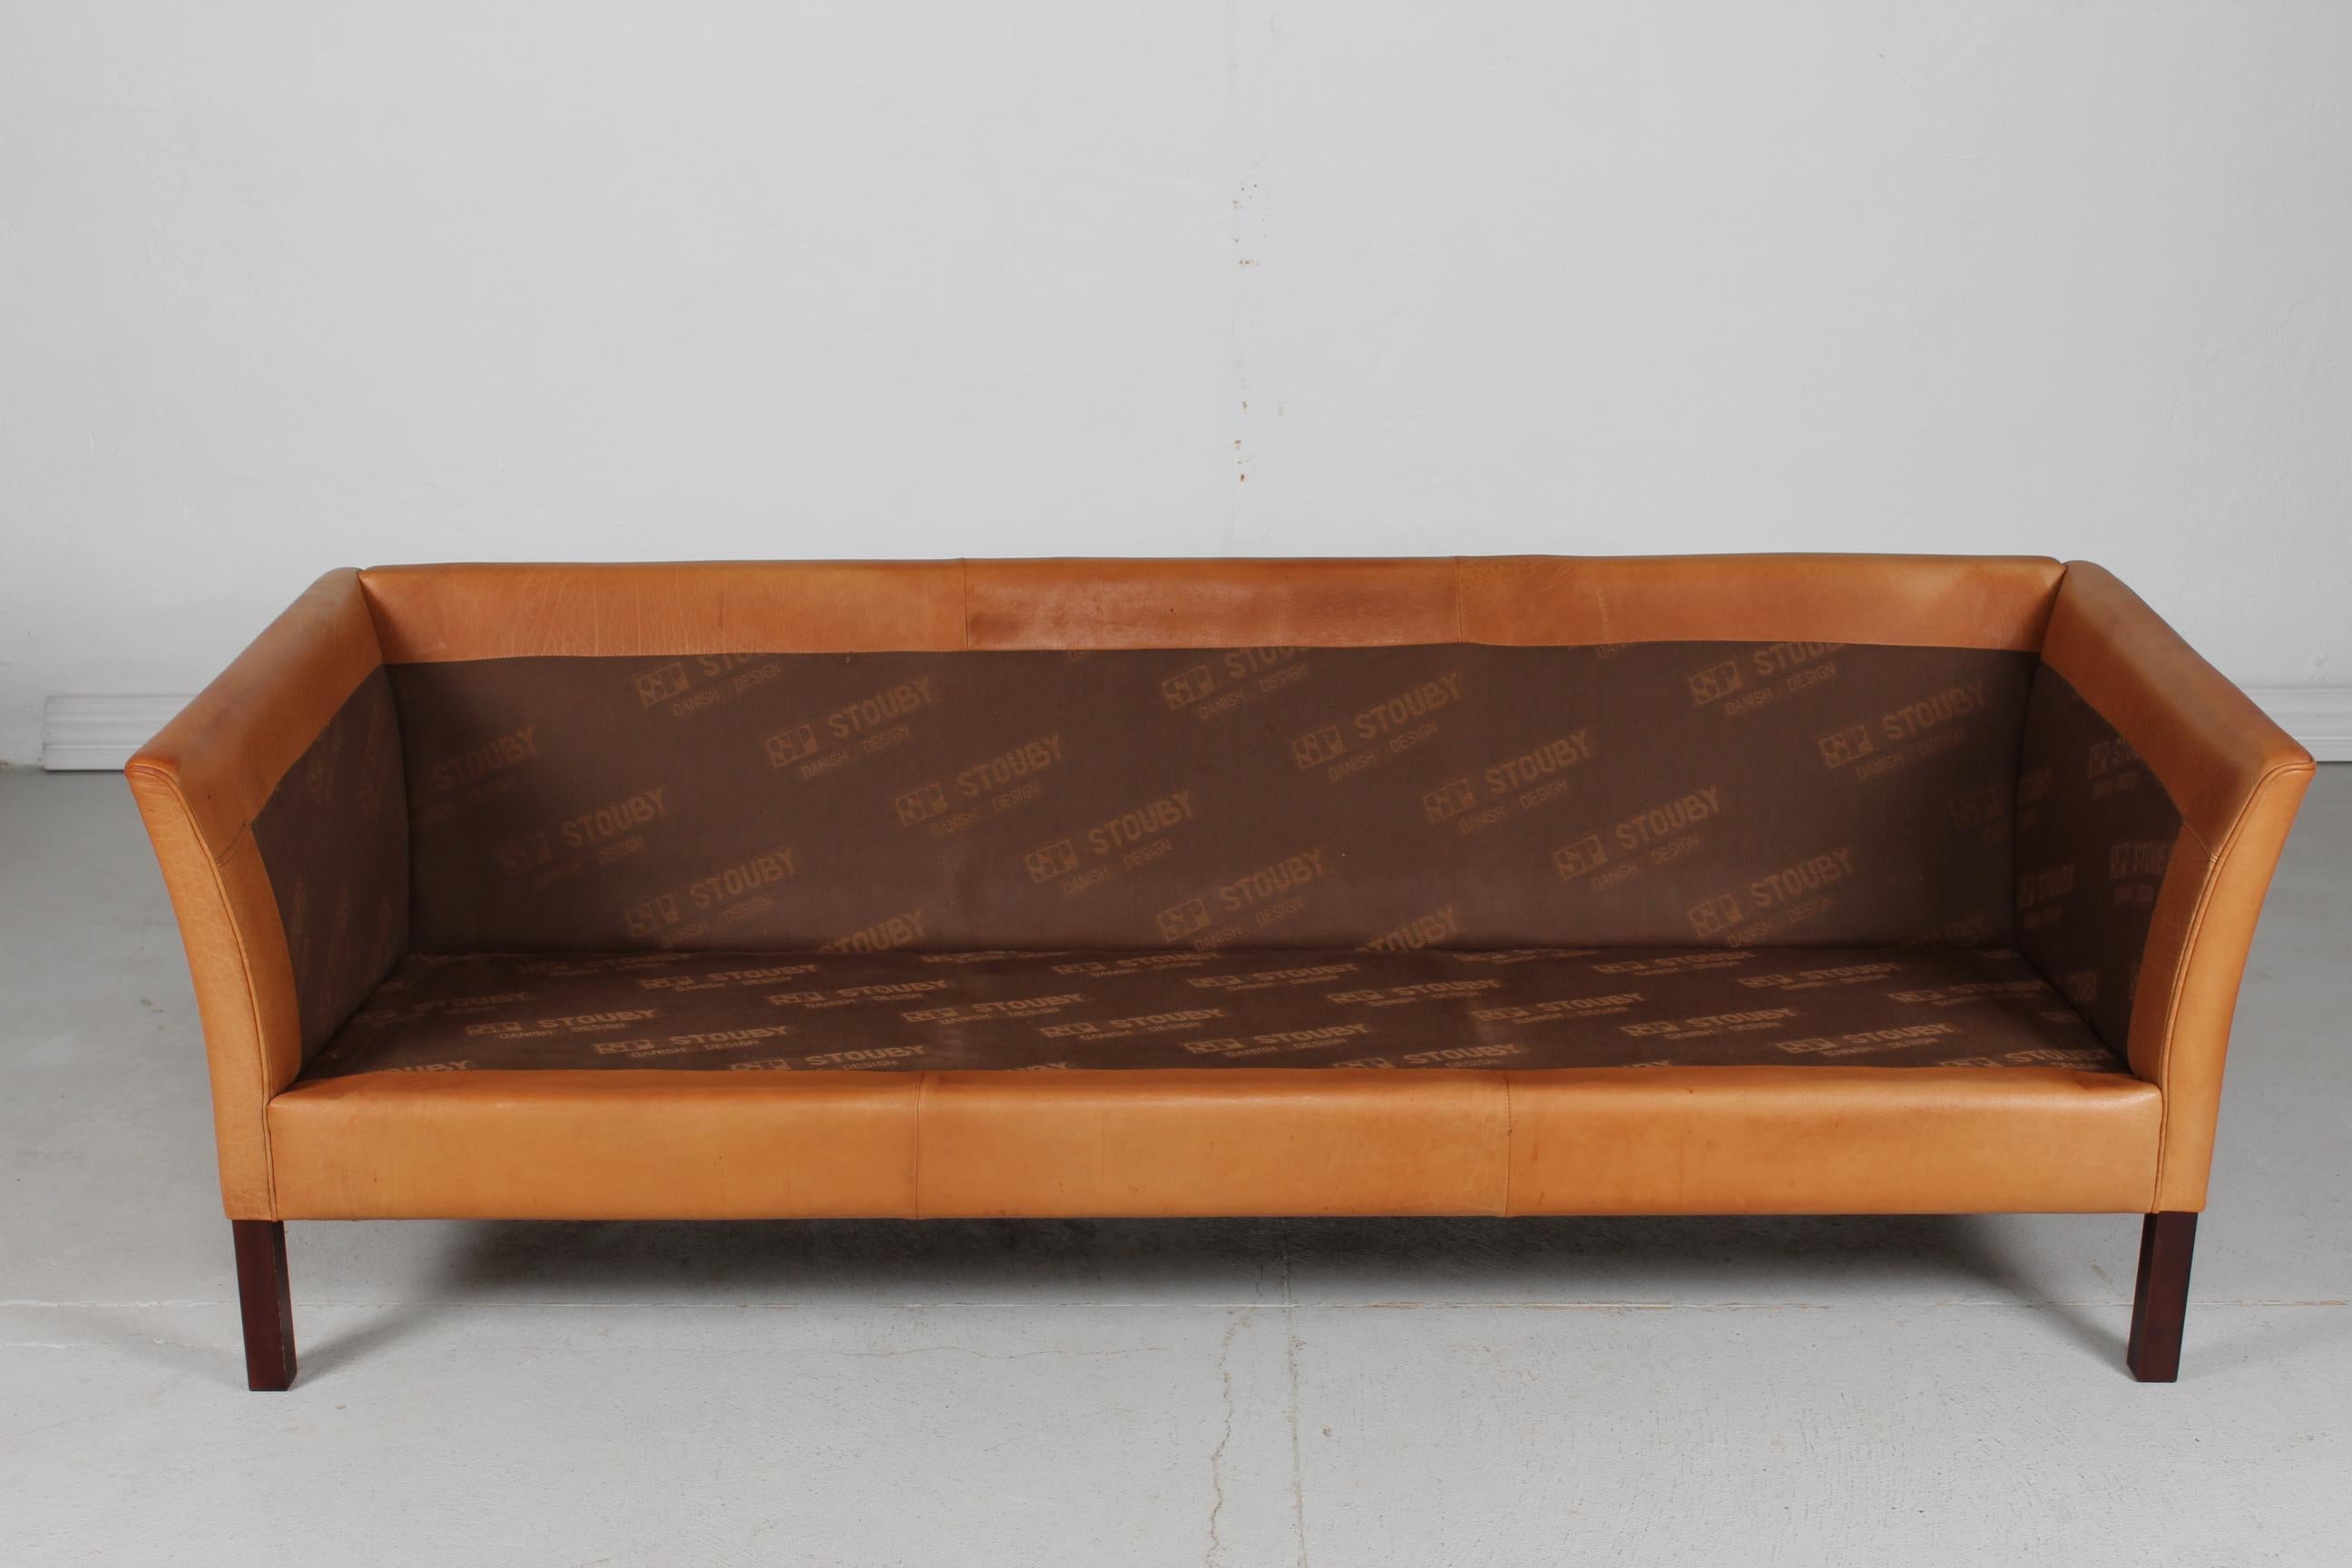 Danish Modern 3-Seat Sofa with Patinated Cognac-Colored Leather 1970s by Stouby 9